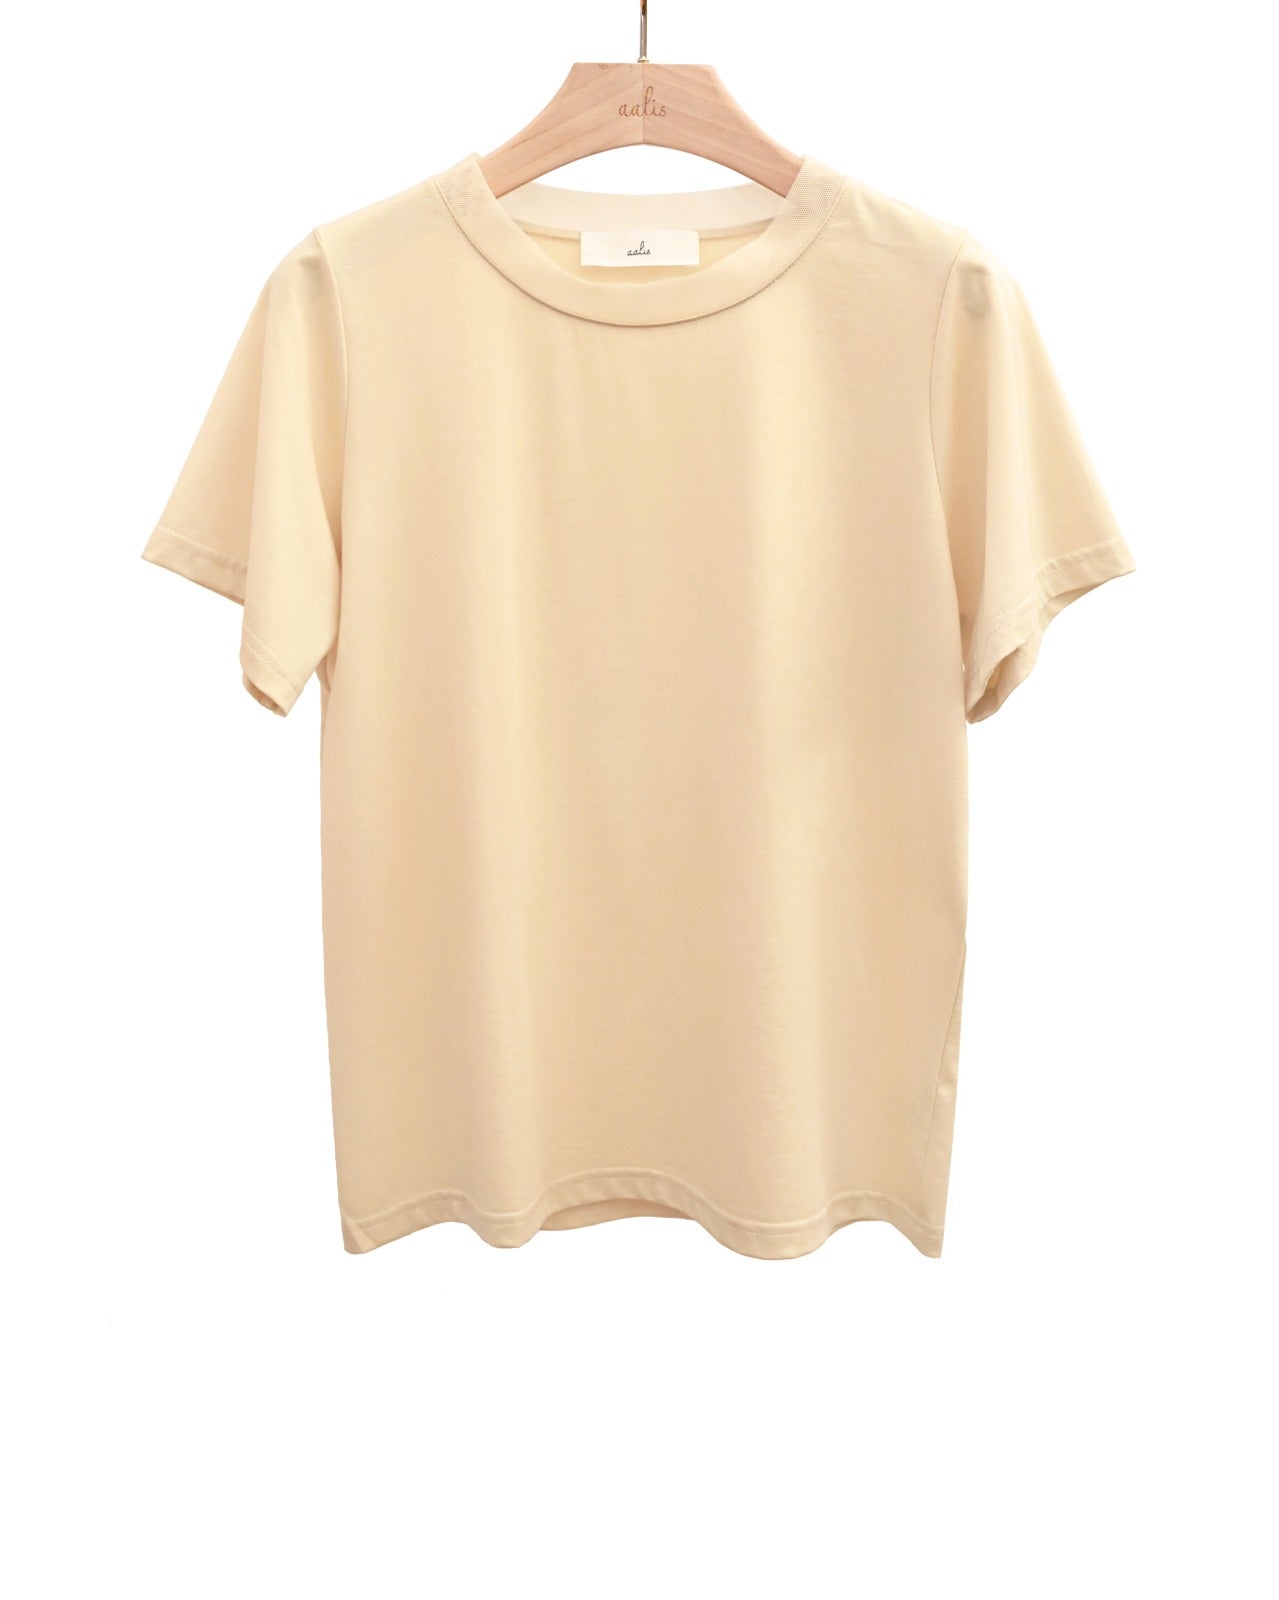 Load image into Gallery viewer, aalis ALTHEA mesh neckline basic tee (Beige)
